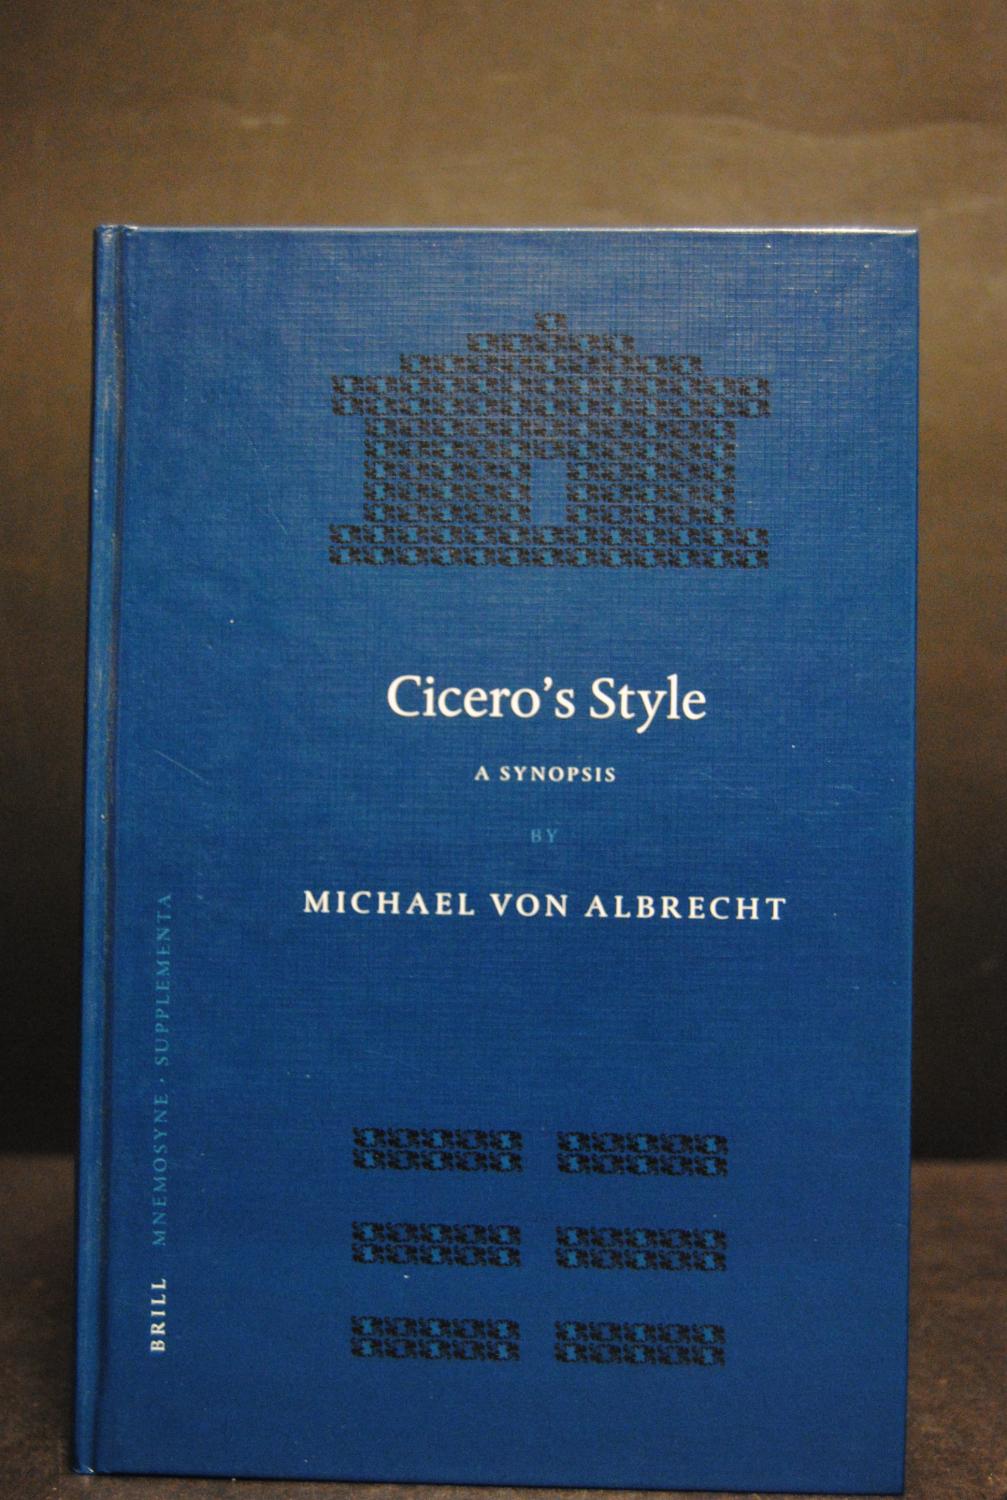 Cicero's Style. A Synopsis followed by selected analytic Studies. - Cicero. - Albrecht, Michael von.